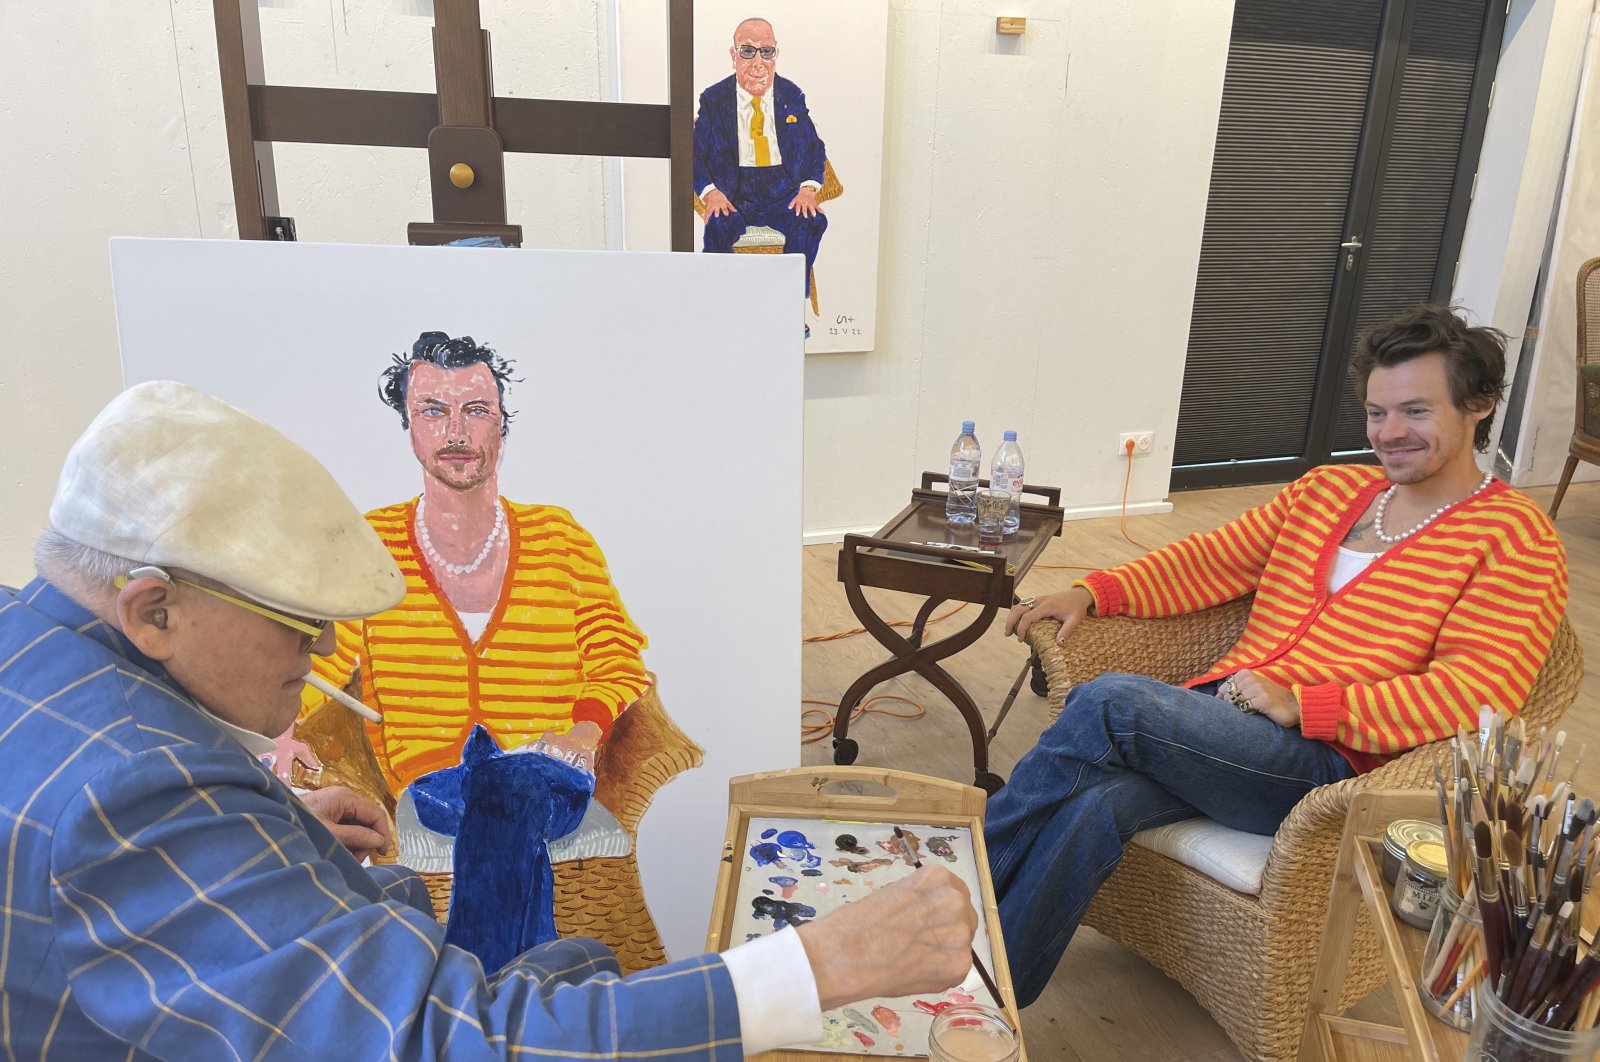 Undated handout photo issued by David Hockney of himself painting a portrait of Harry Styles which will go on display as part of &quot;David Hockney: Drawing from Life,&quot; which opens on Nov. 2 at the National Portrait Gallery in London, U.K., Aug. 2, 2023. (dpa Photo)